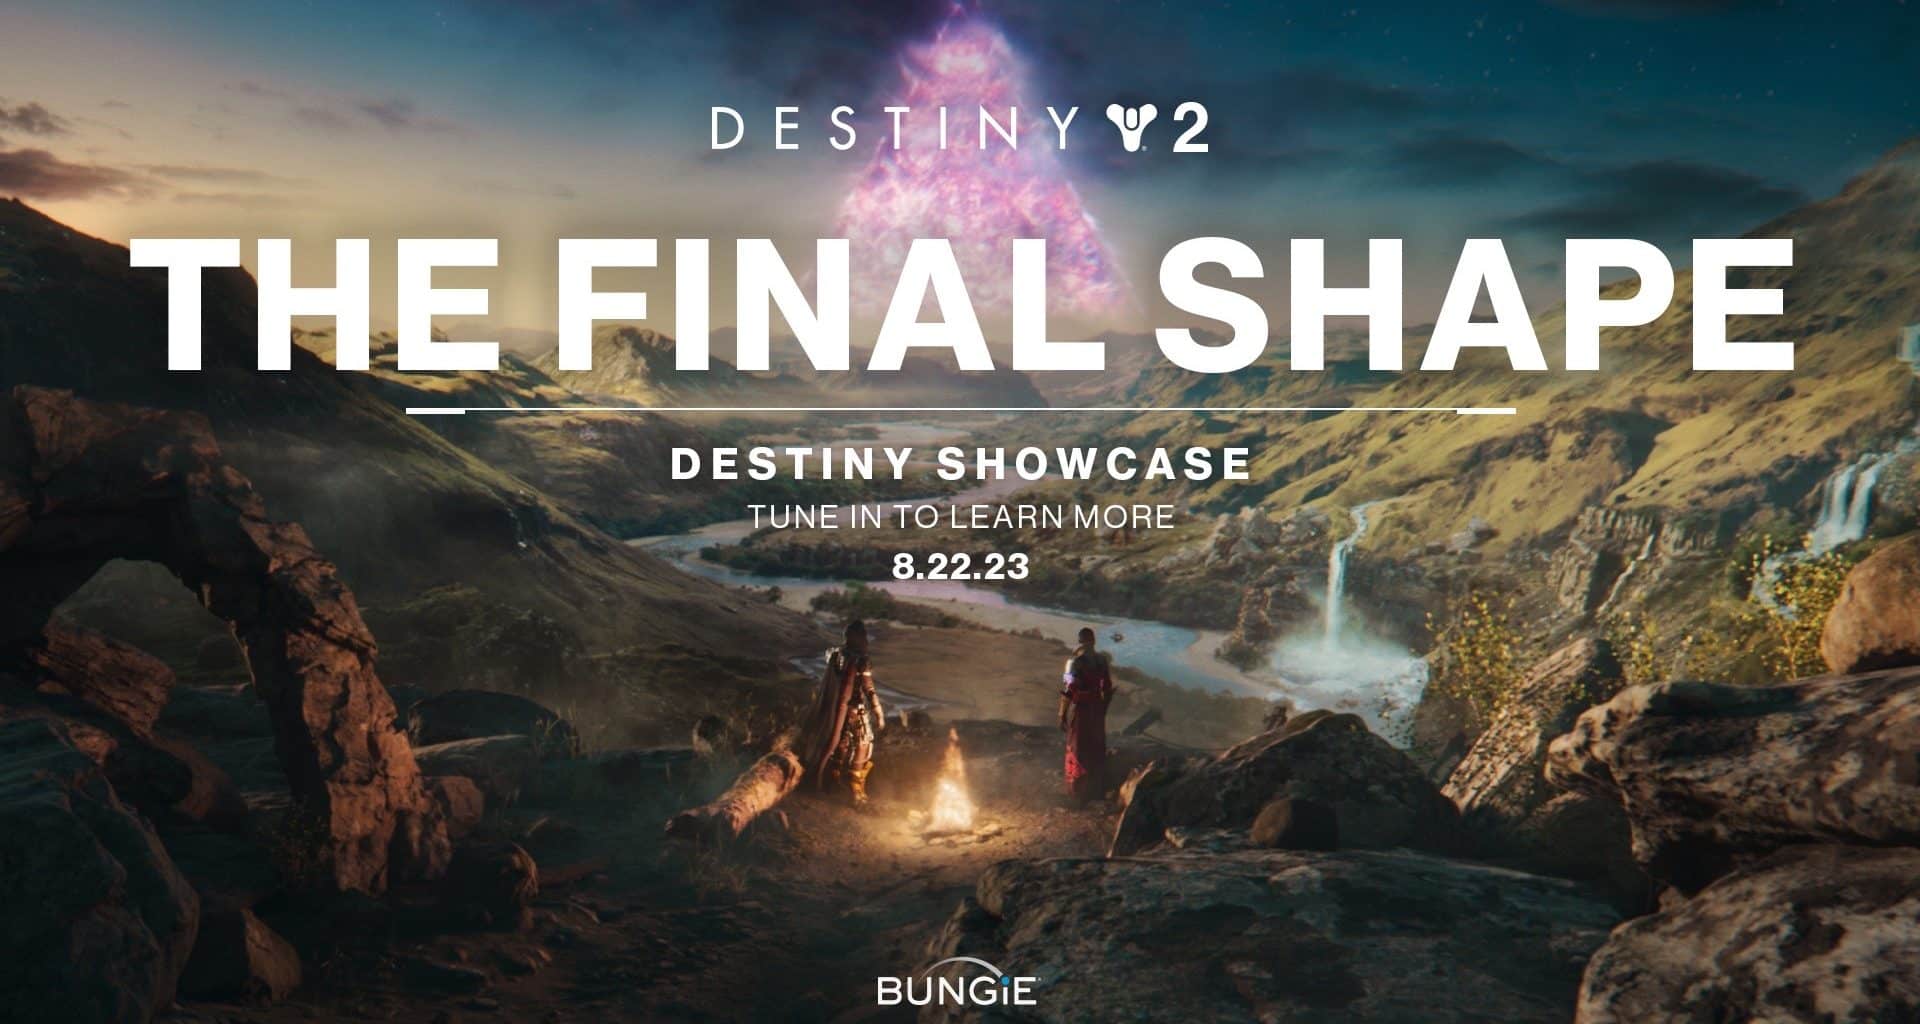 Destiny 2: The Final Shape's Teaser Trailer Accomplishes a Lot in Just a Minute 1